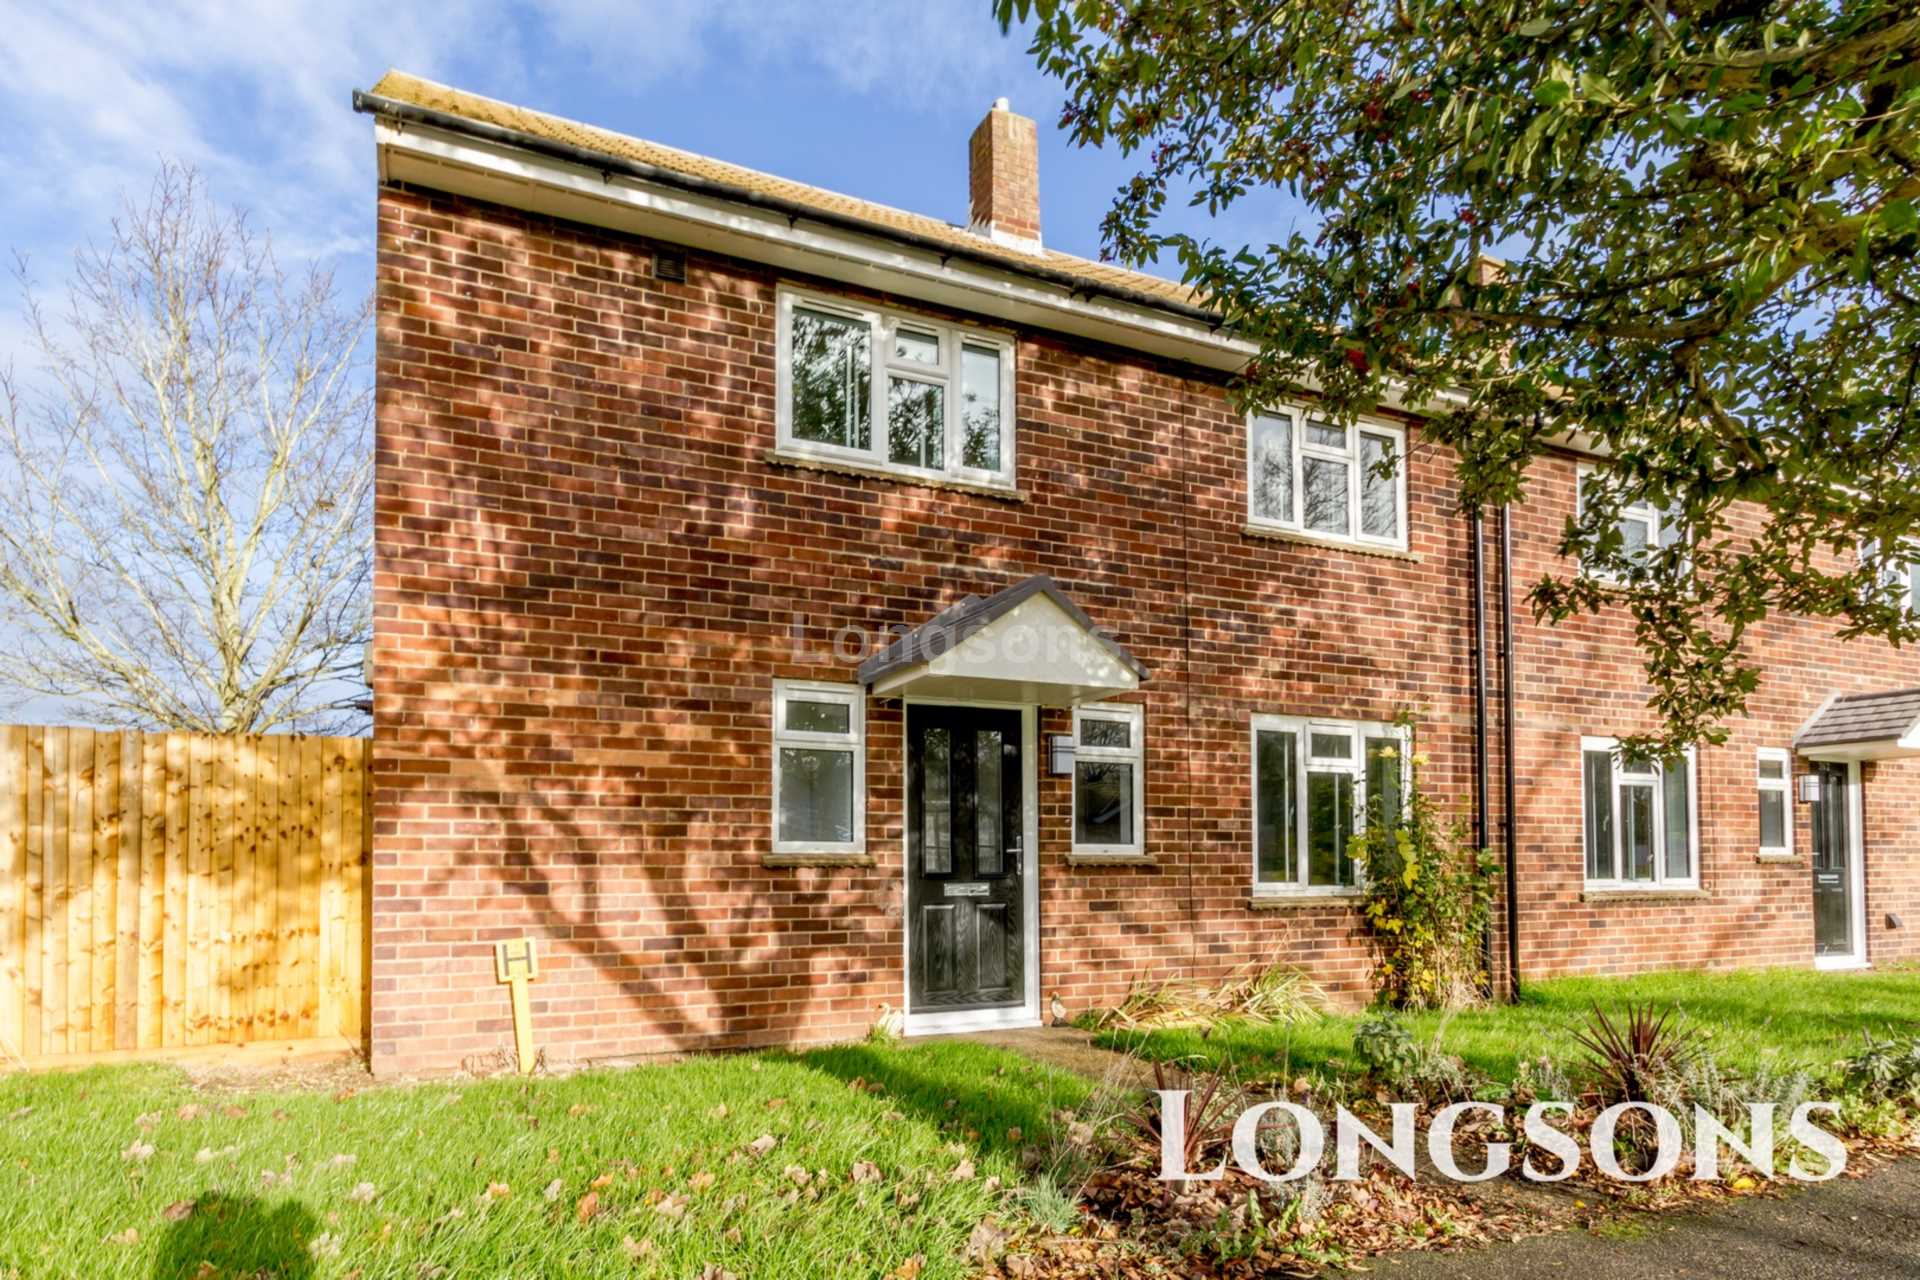 3 bed End Terraced House for rent in Kings Lynn. From Longsons - Swaffham